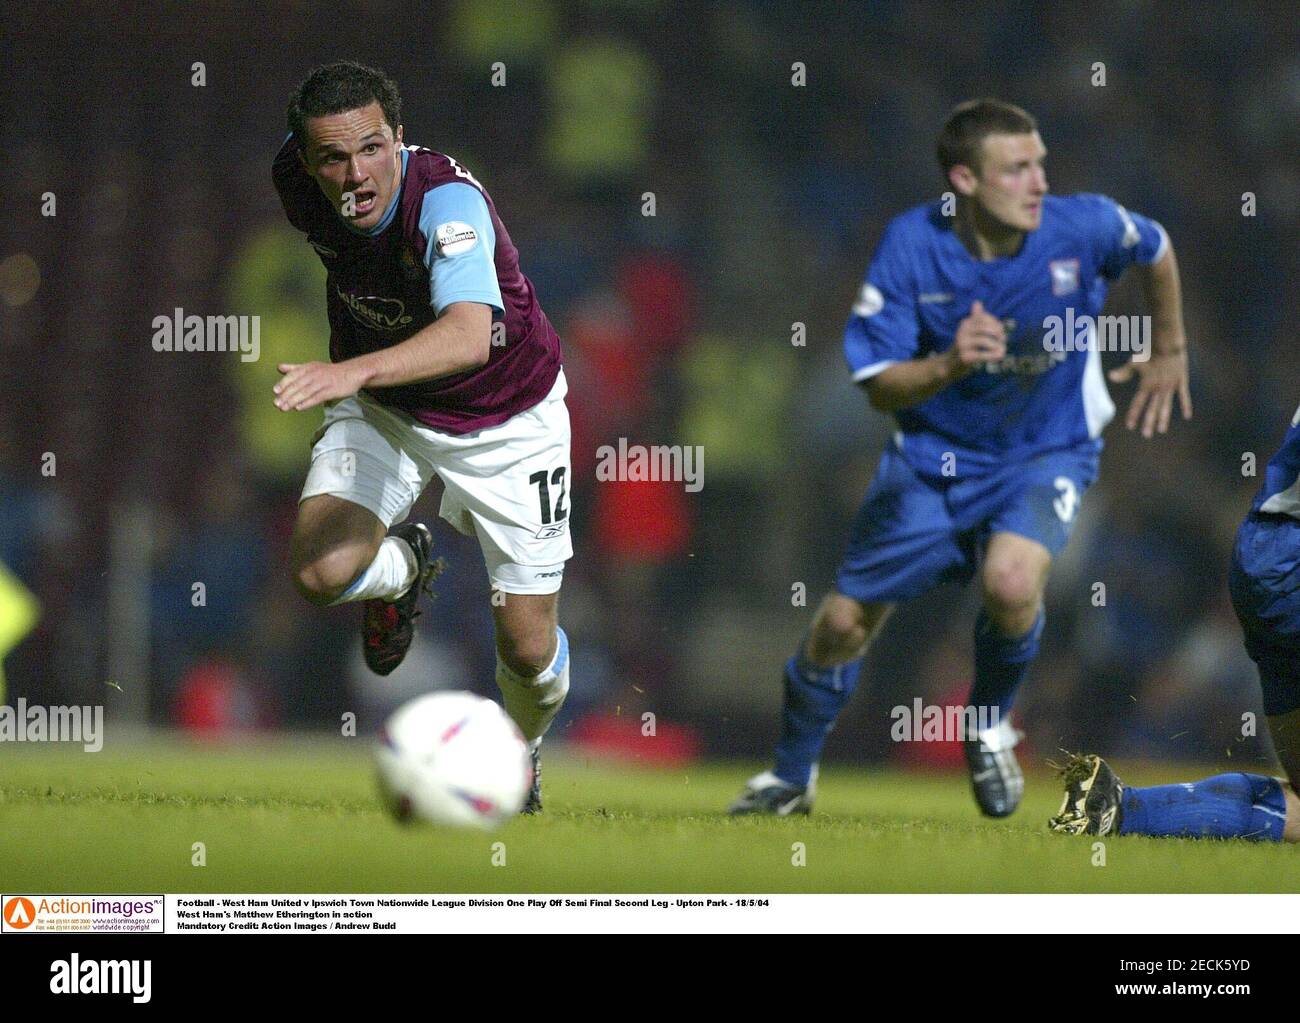 Football - West Ham United v Ipswich Town Nationwide League Division One Play Off Semi Final Second Leg - Upton Park - 18/5/04  West Ham's Matthew Etherington in action  Mandatory Credit: Action Images / Andrew Budd Stock Photo